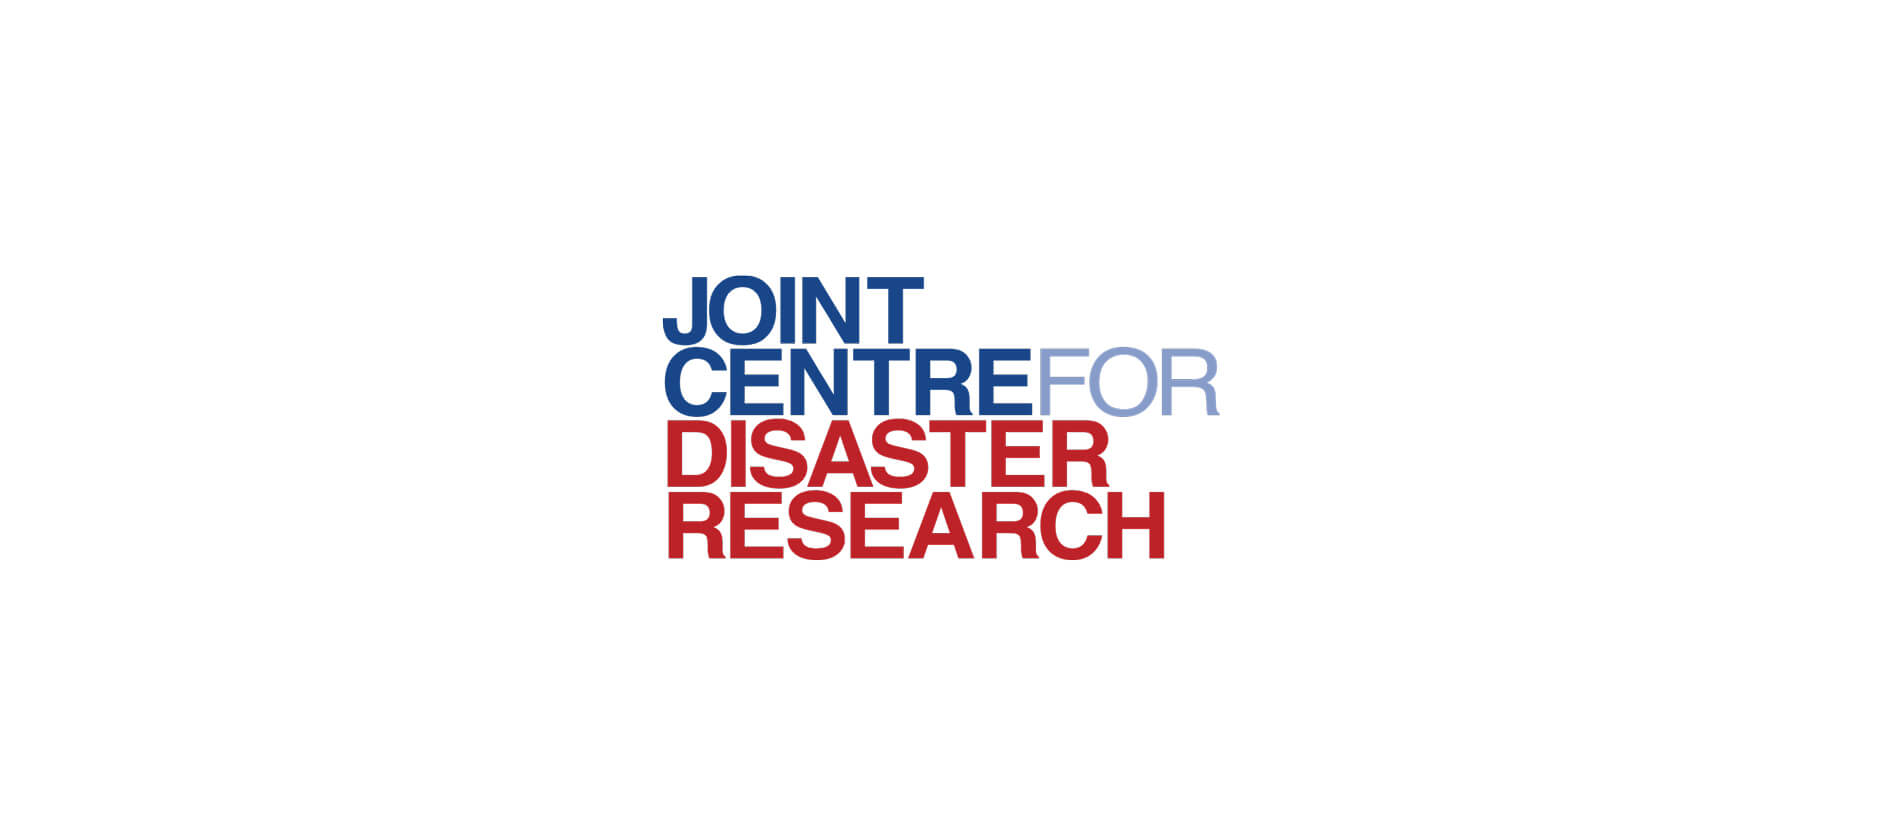 joint centre for disaster research logo